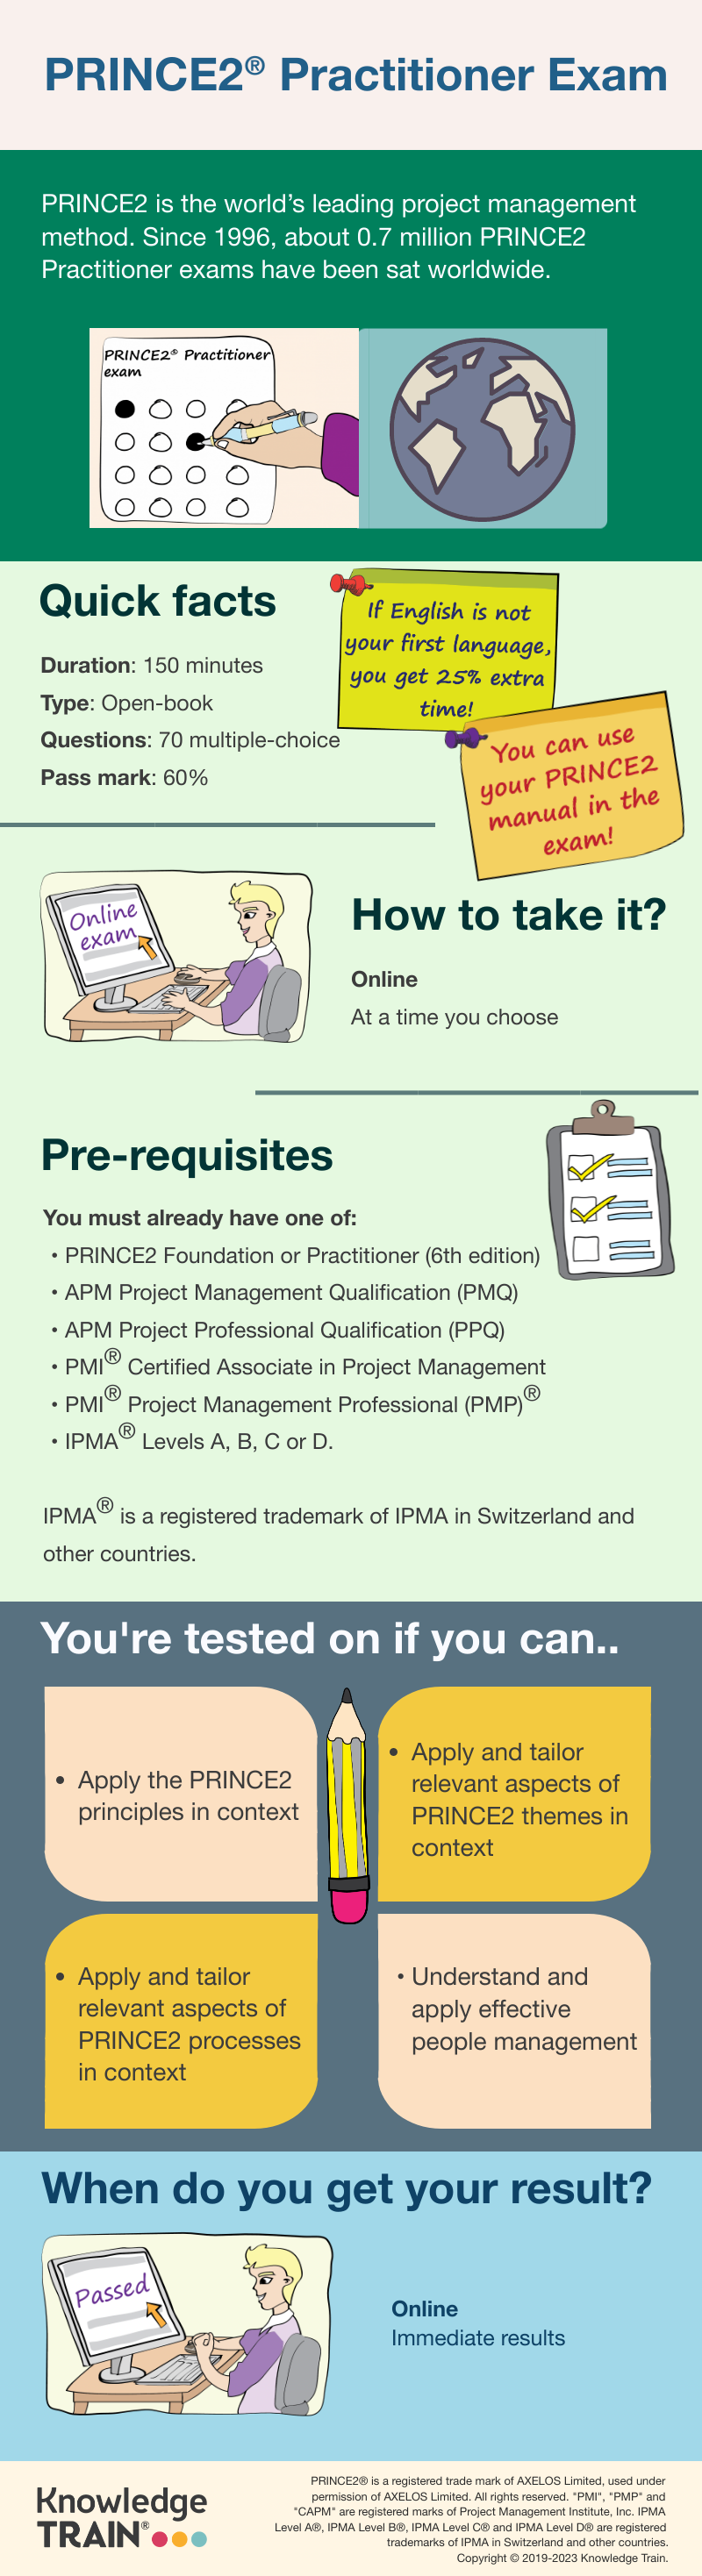 Infographic about the PRINCE2 Practioner exam.